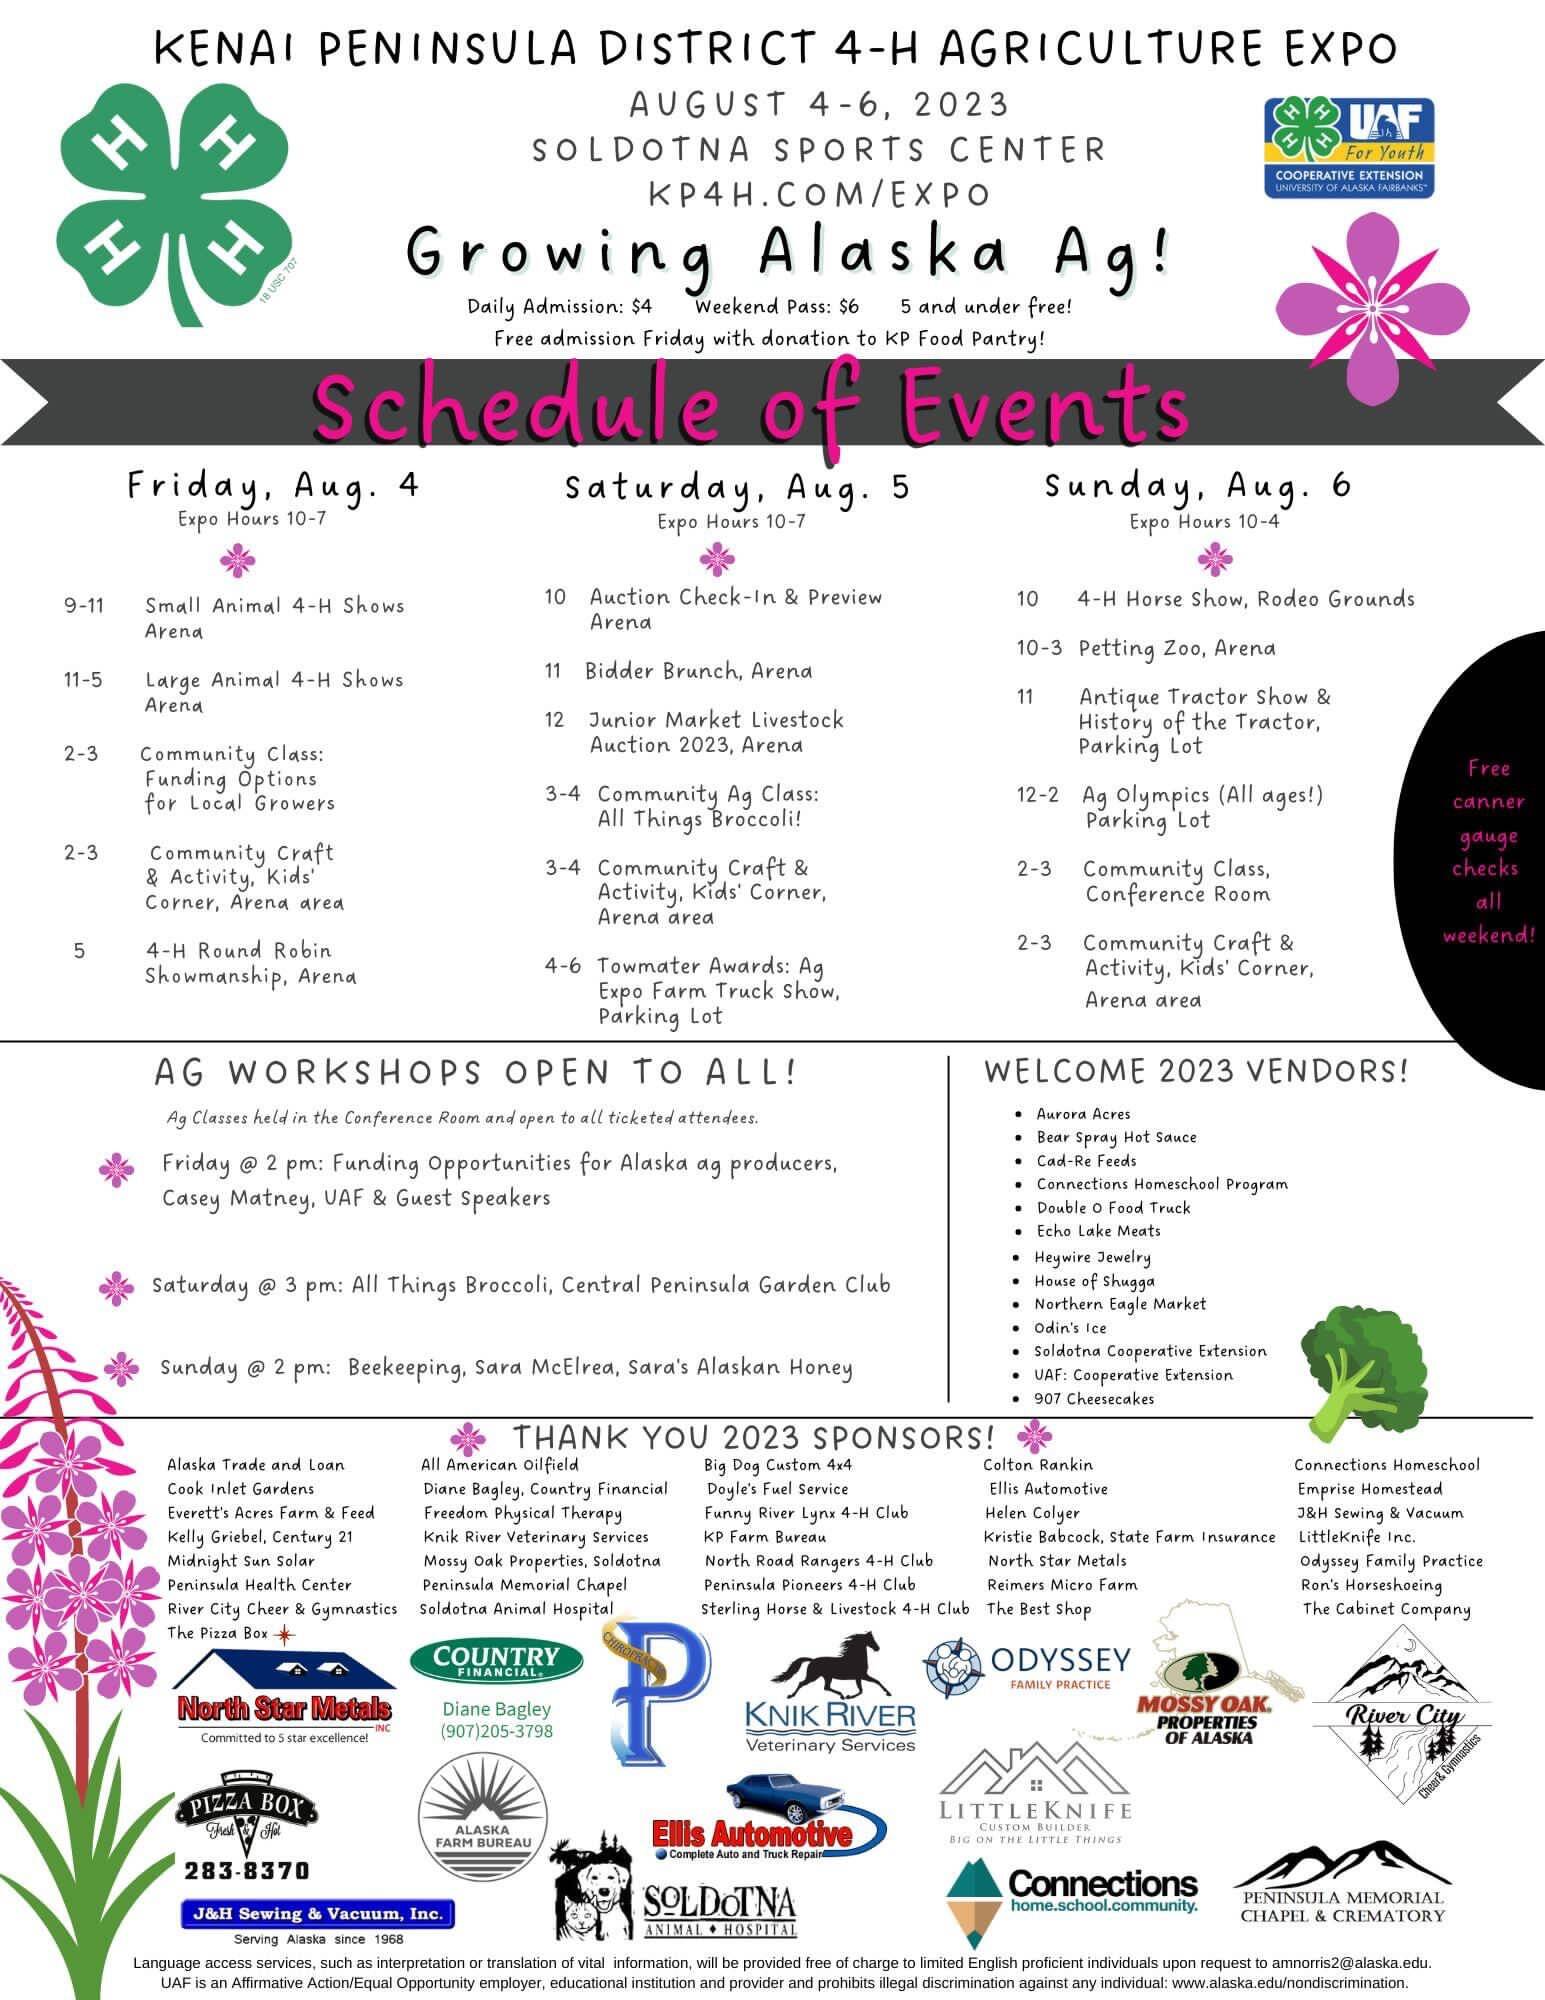 A poster and schedule for the 2023 Kenai Peninsula District 4-H Agriculture Expo. (Photo provided by Cassy Rankin)